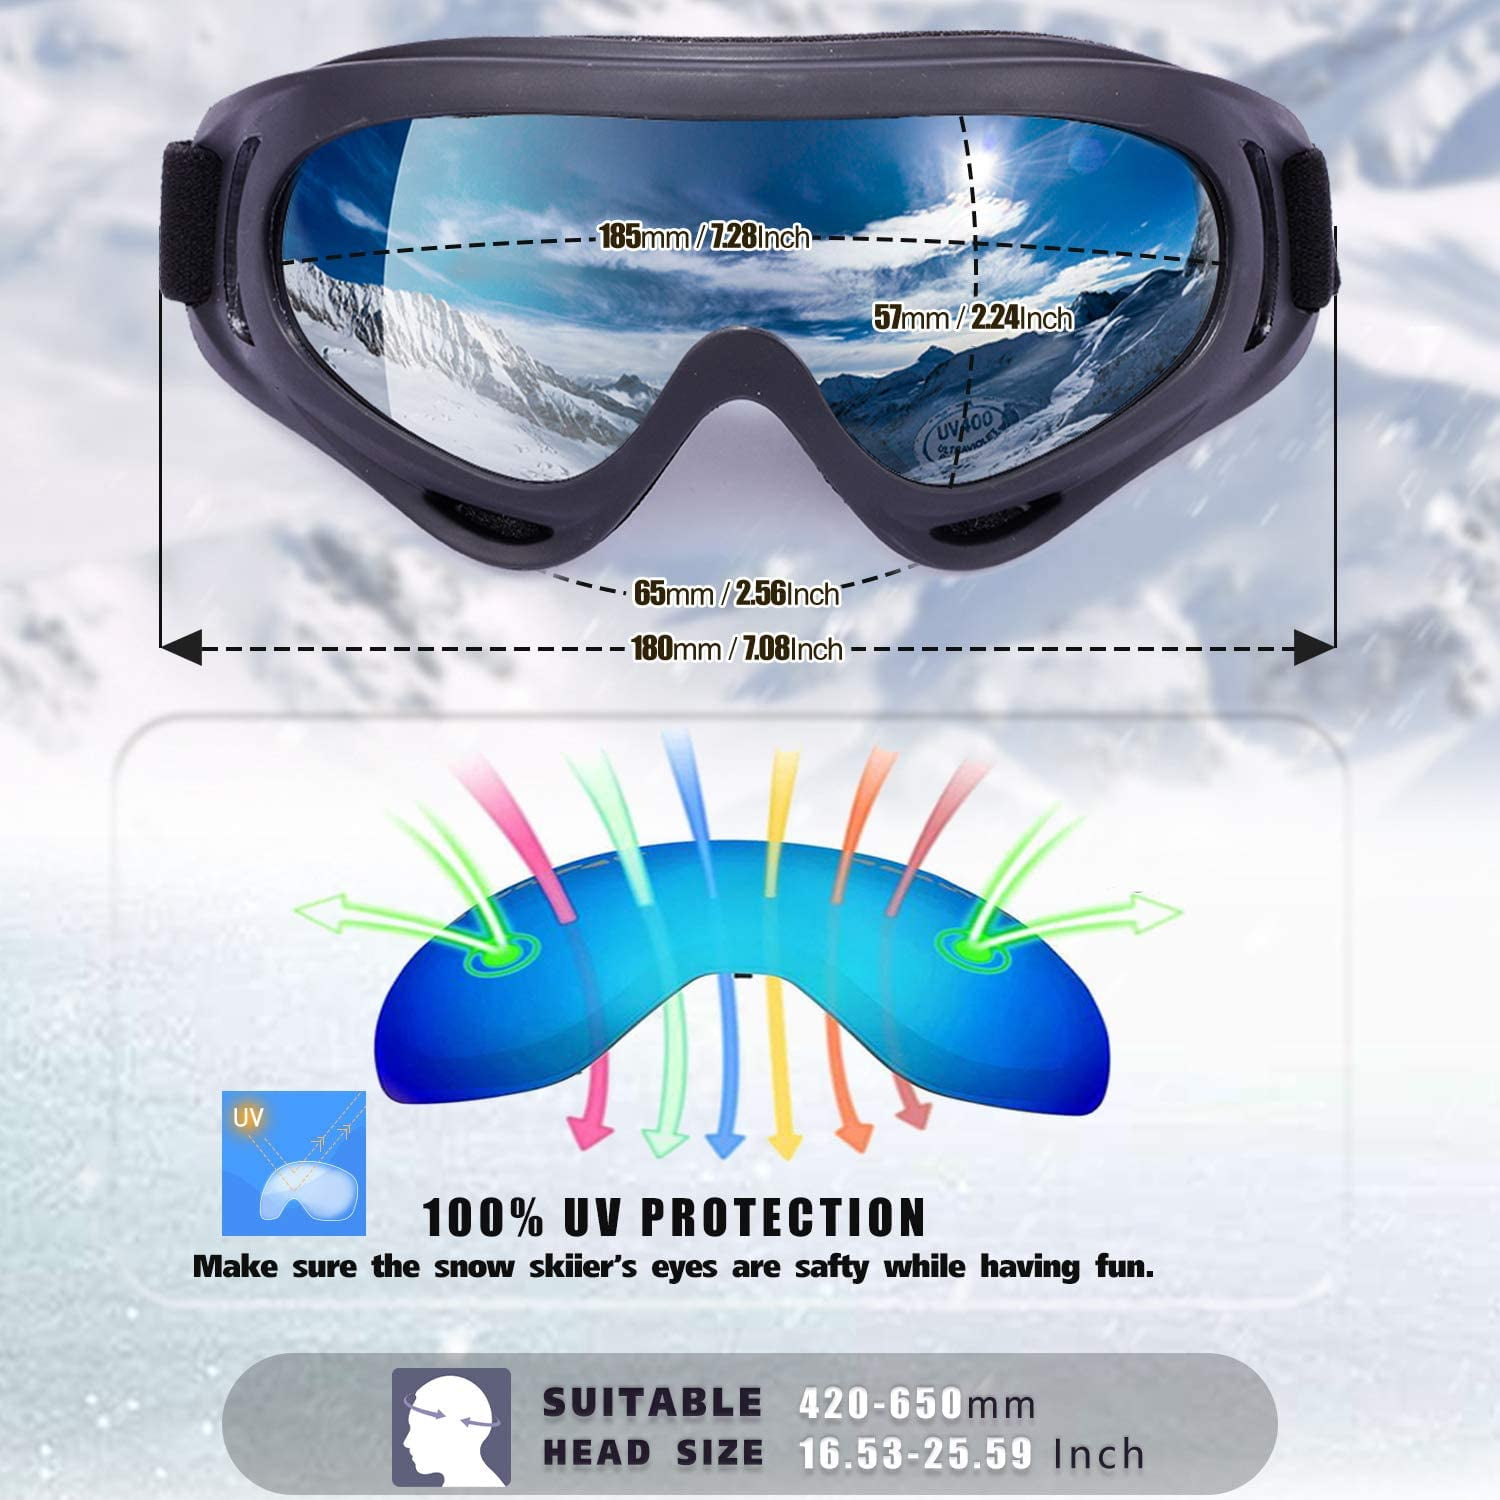 2-Pack Snow Ski Goggles Snowboard Goggles for Men Women Youth Kids Boys or Girls 